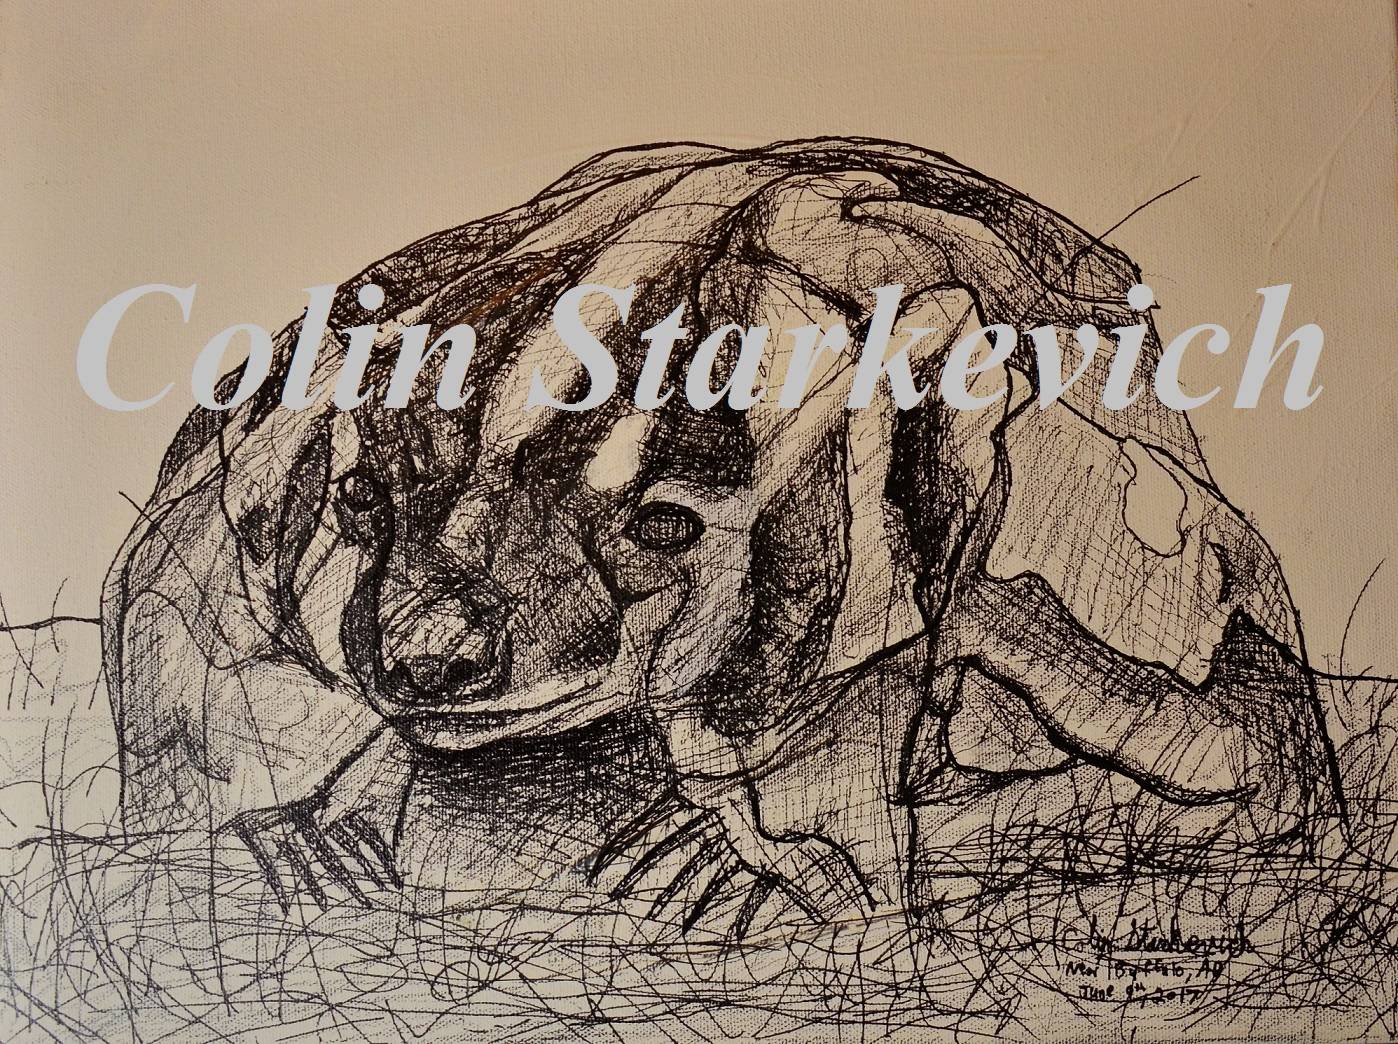 Badger Erratic Drawing (12 by 16" mixed media on canvas)